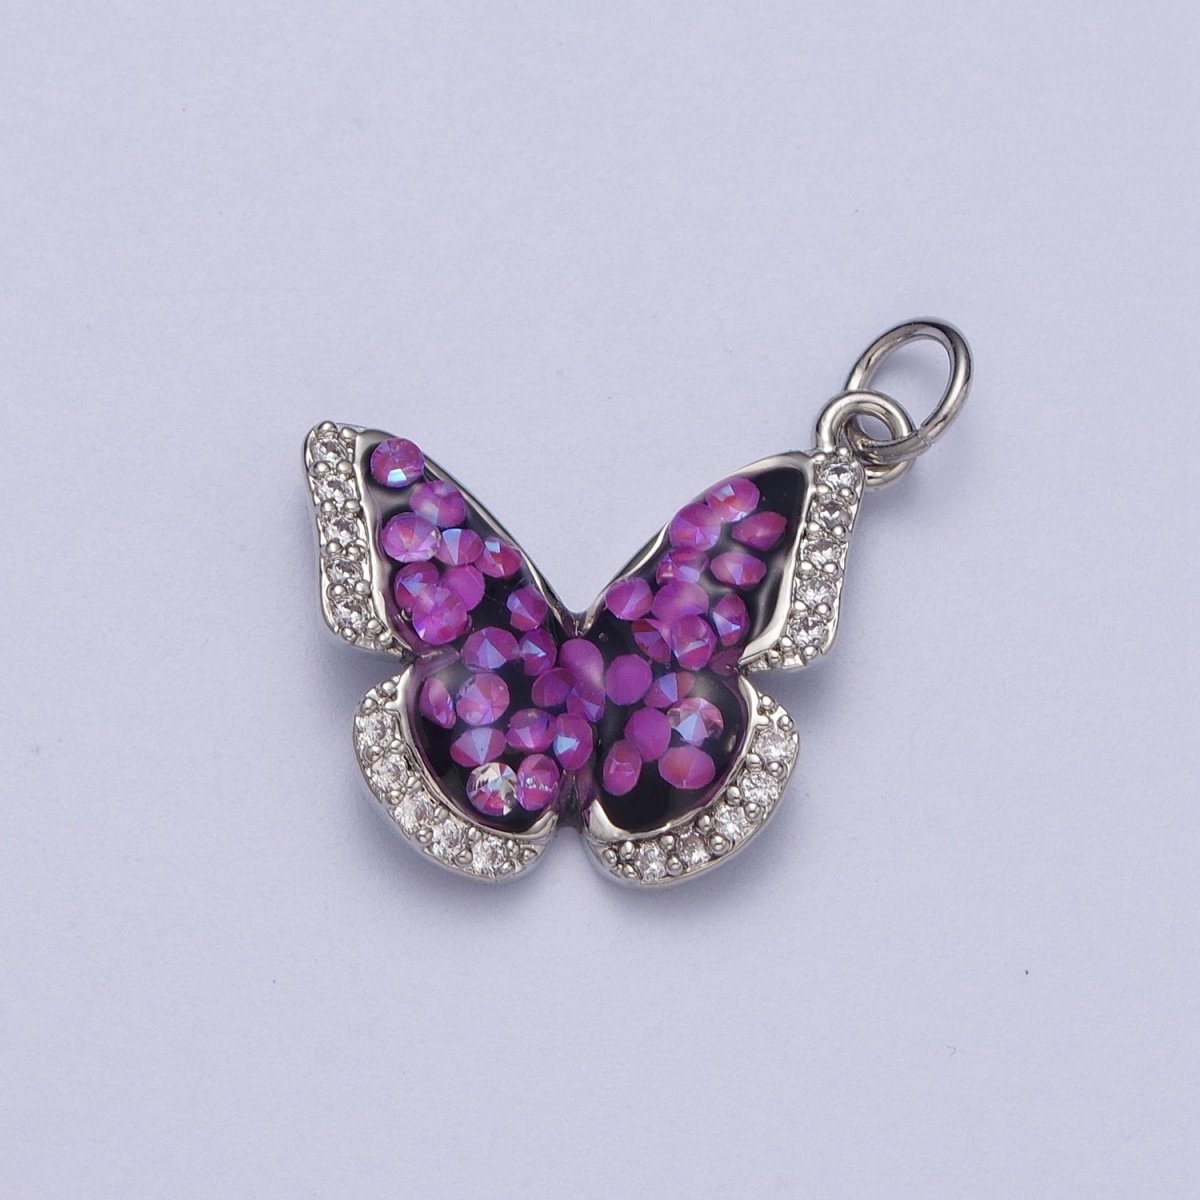 Gold Filled Micro Paved Monarch Butterfly AB CZ Stone Charm in Gold & Silver | A-377,A-390,A-403,A-416,A-429,A-442,A-455,A-481 - DLUXCA